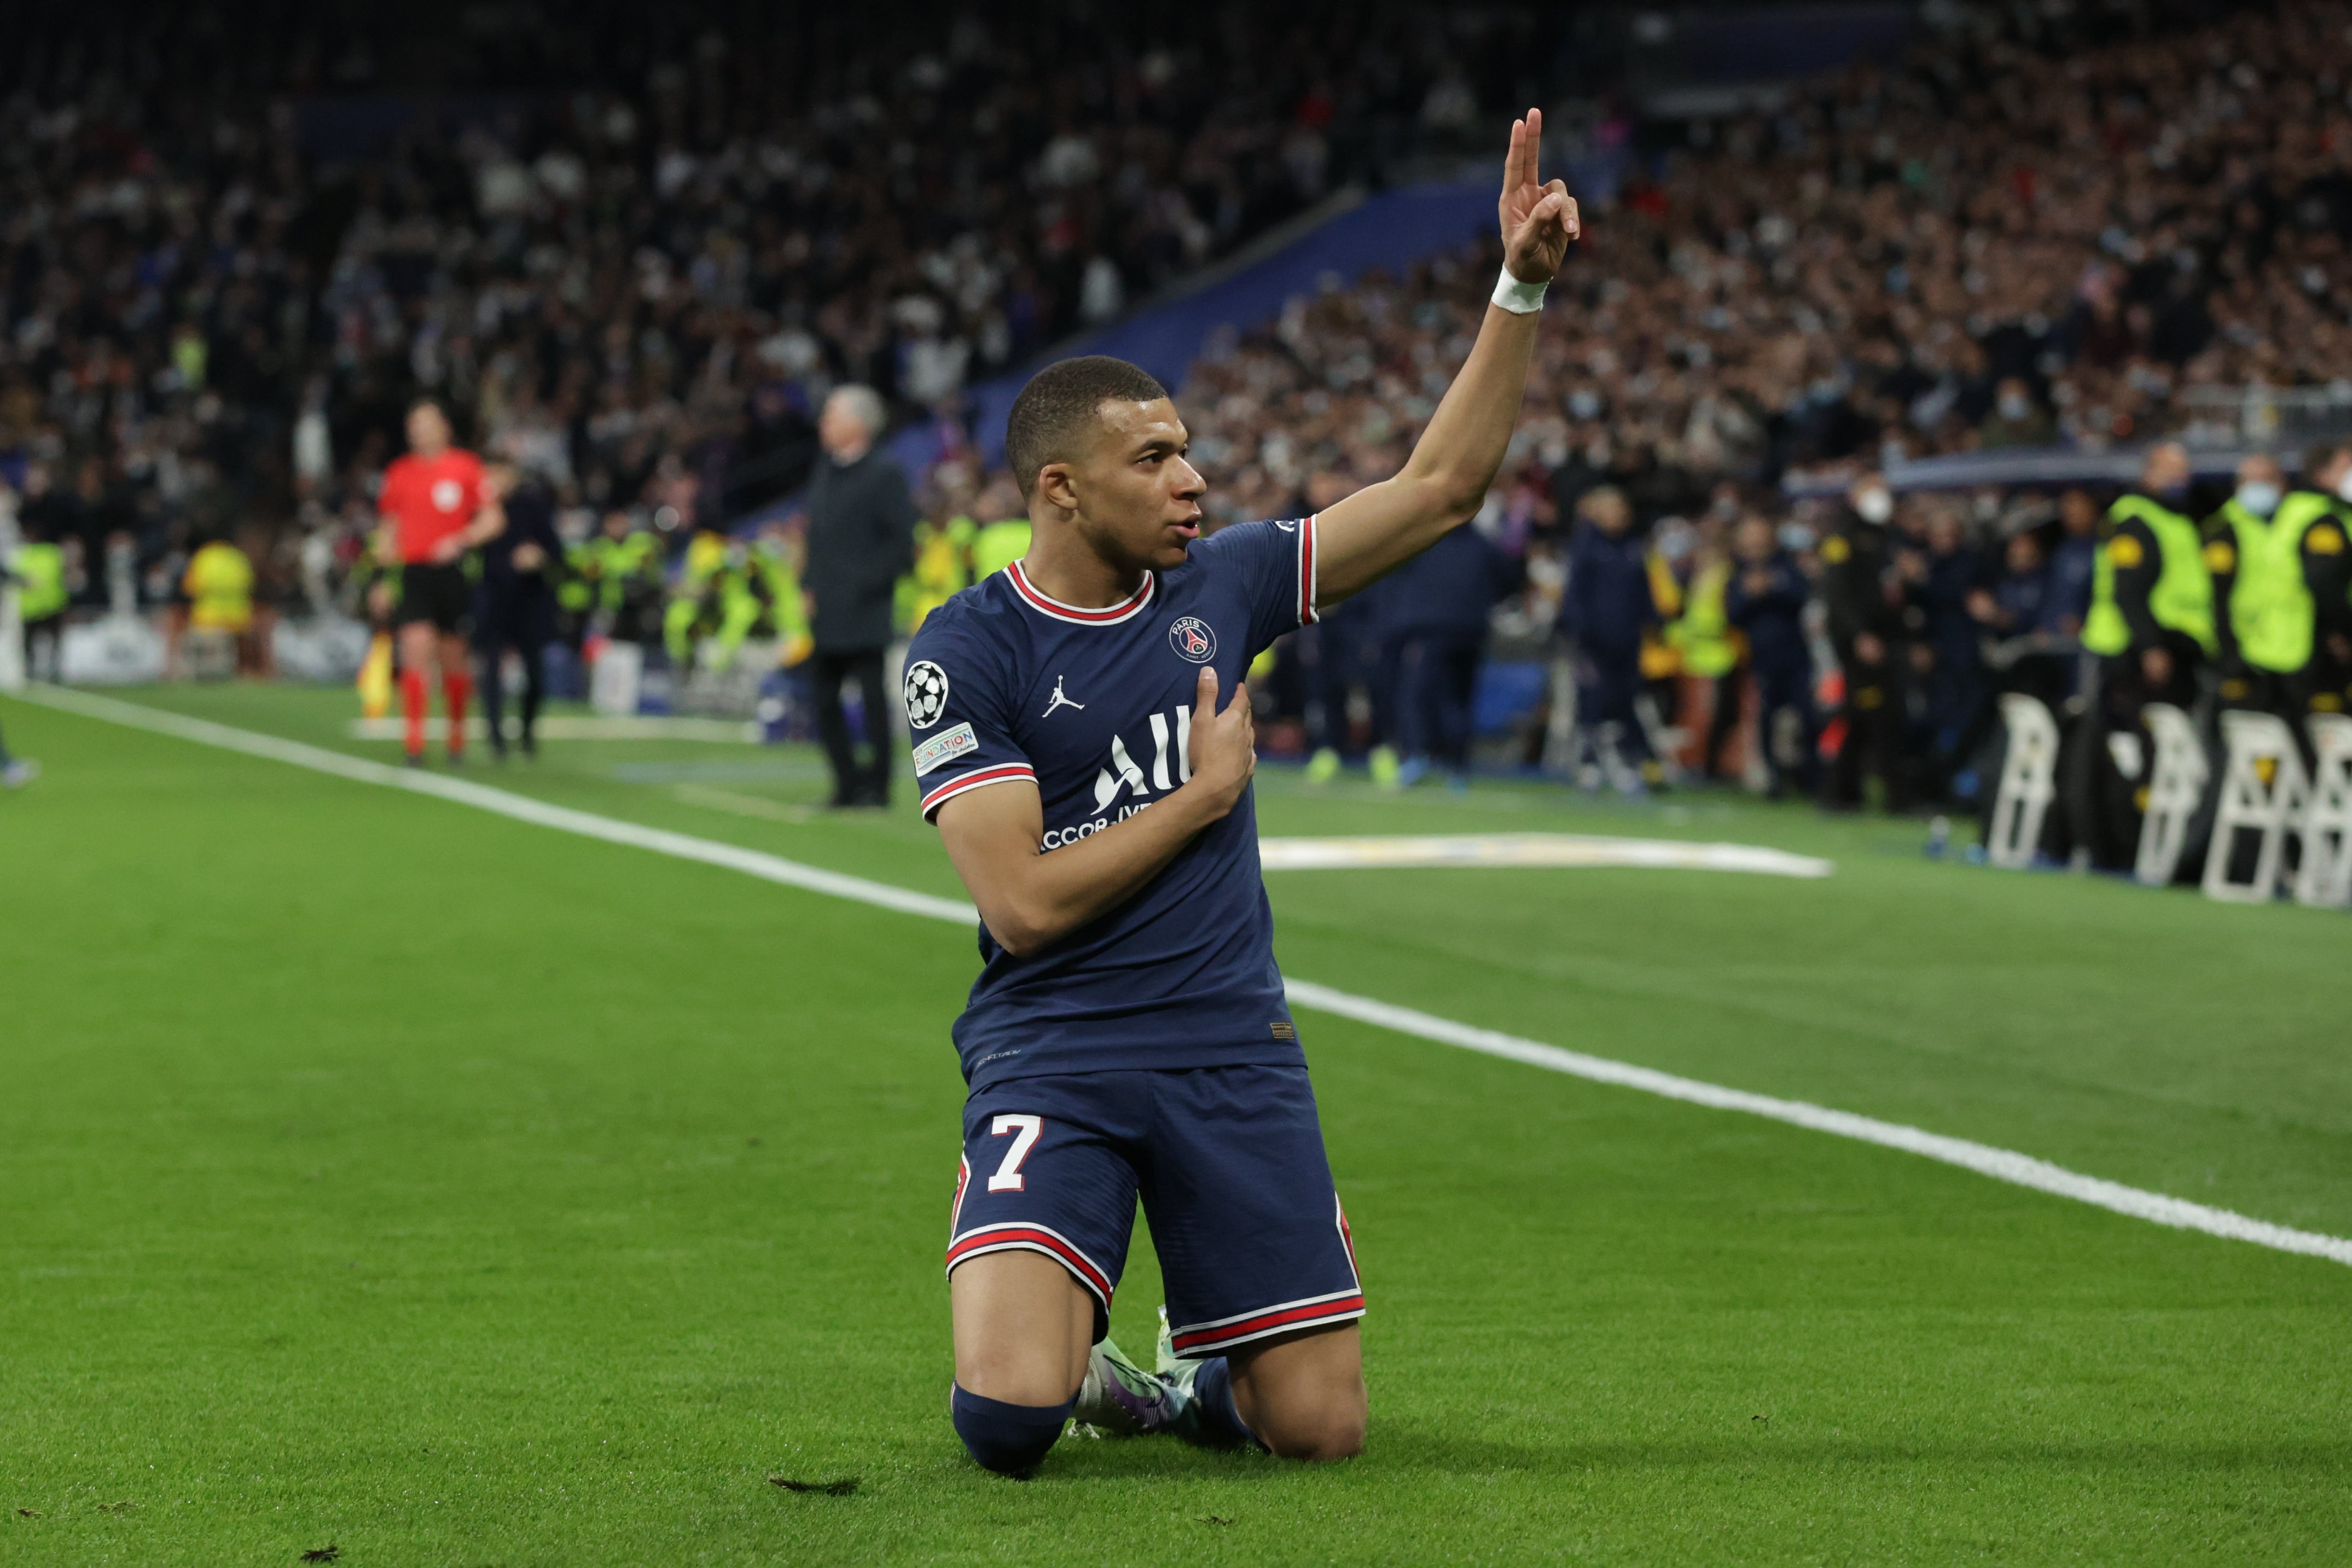 Will Mbappe be prepared to spend a year of his prime in the Saudi Pro League?